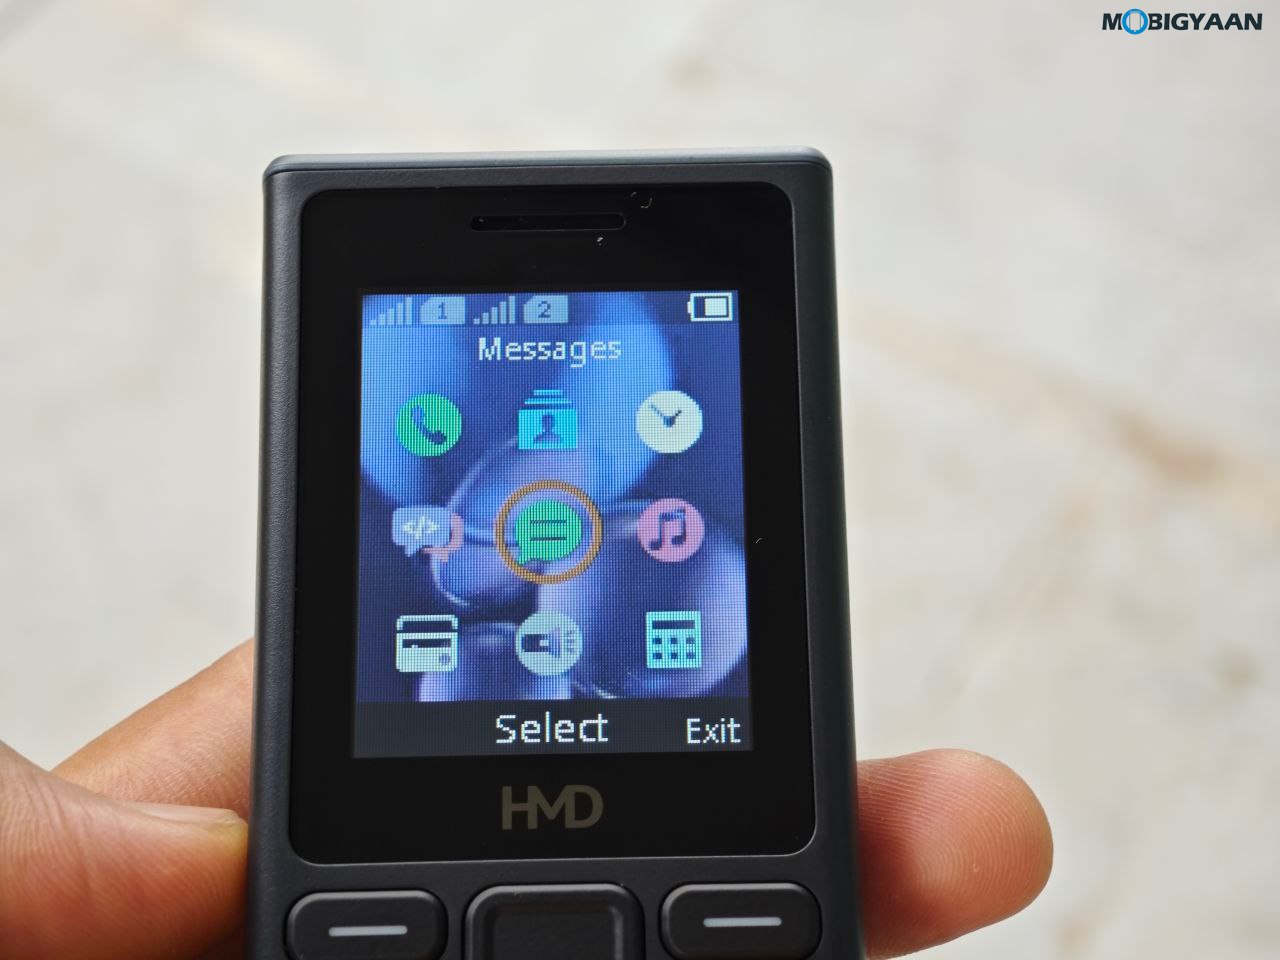 HMD 105 Feature Phone Review 5